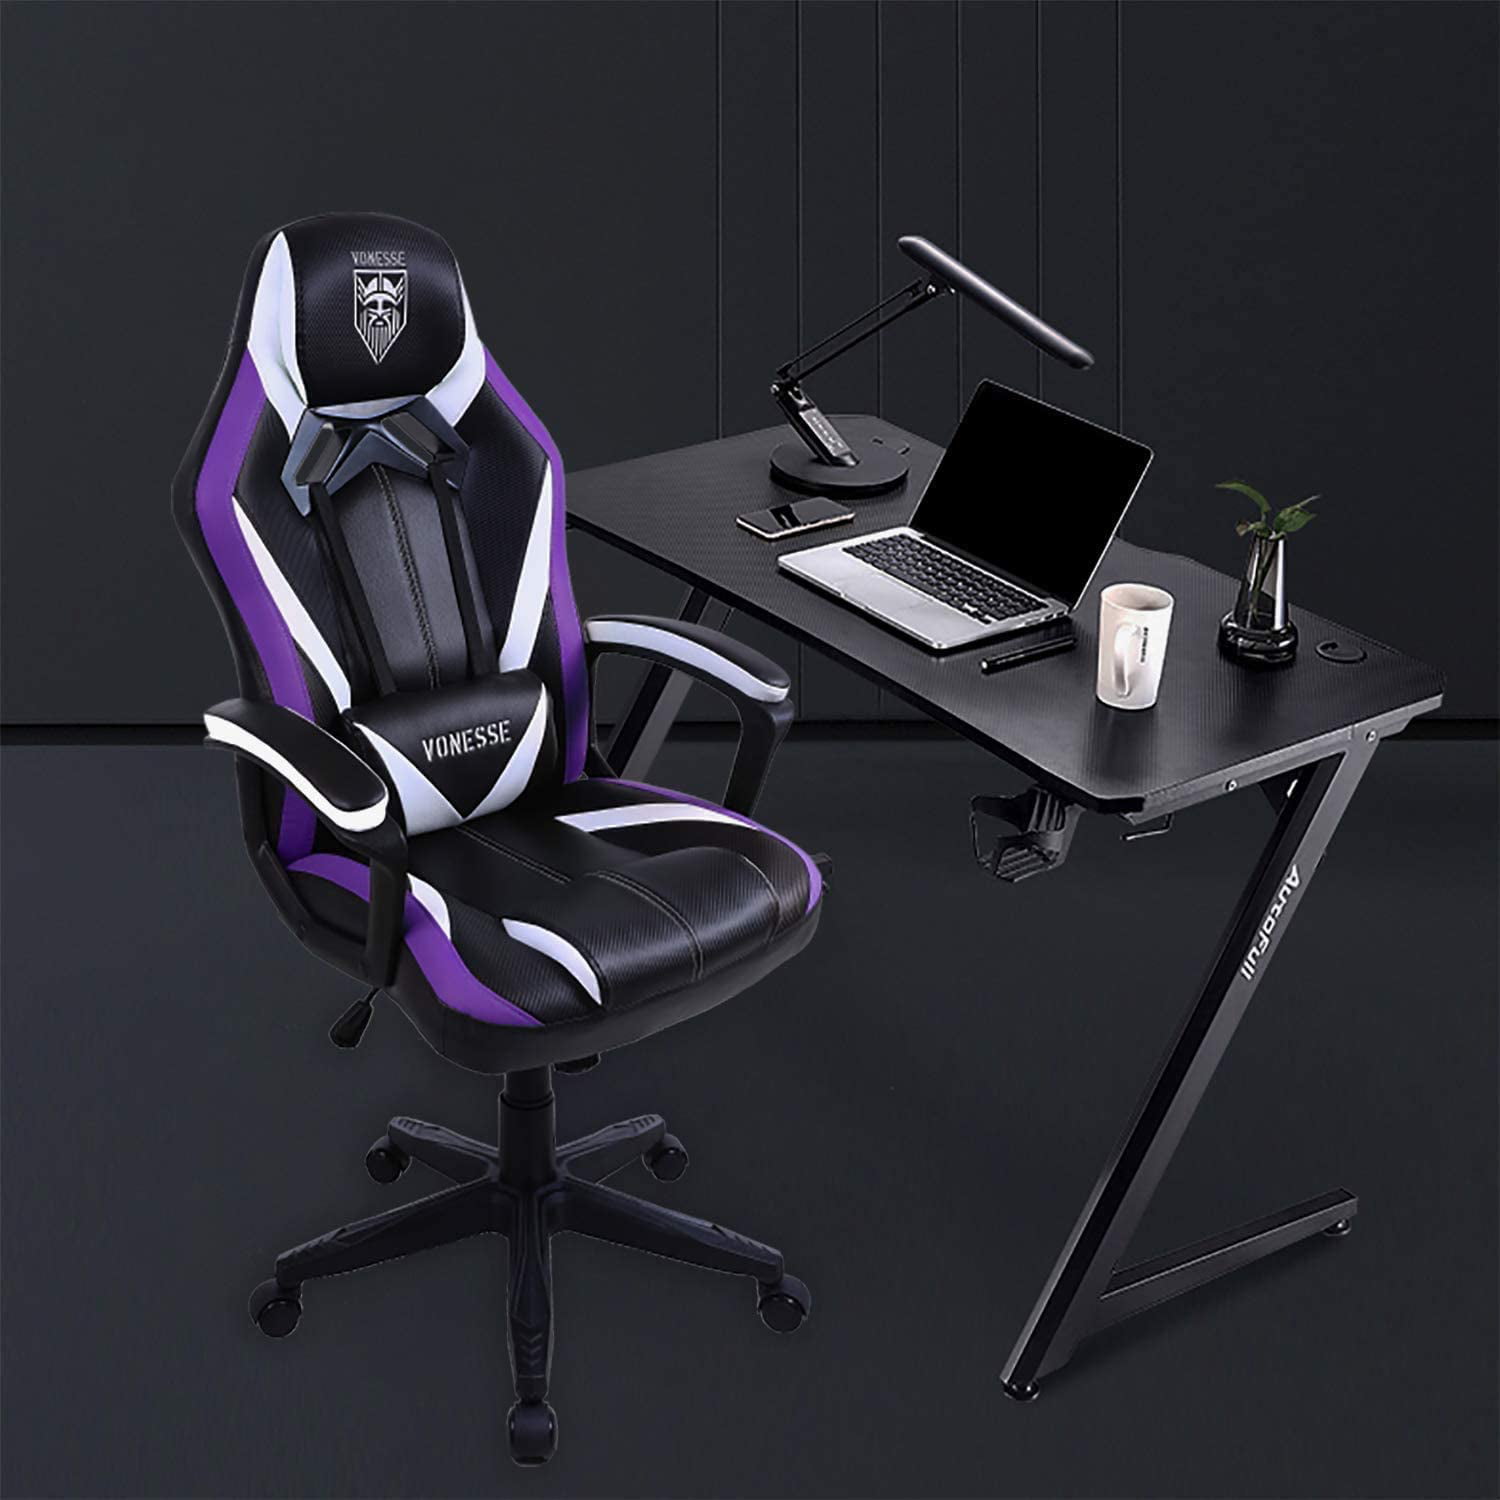 Gray High Back Computer Gaming Chair Swivel Gaming Desk Chair Ergonomic Gaming Chair with Massage Esport Gamer Chair Big and Tall Racing Style Home Office Chair Carbon Fibre Modern Office Chair 